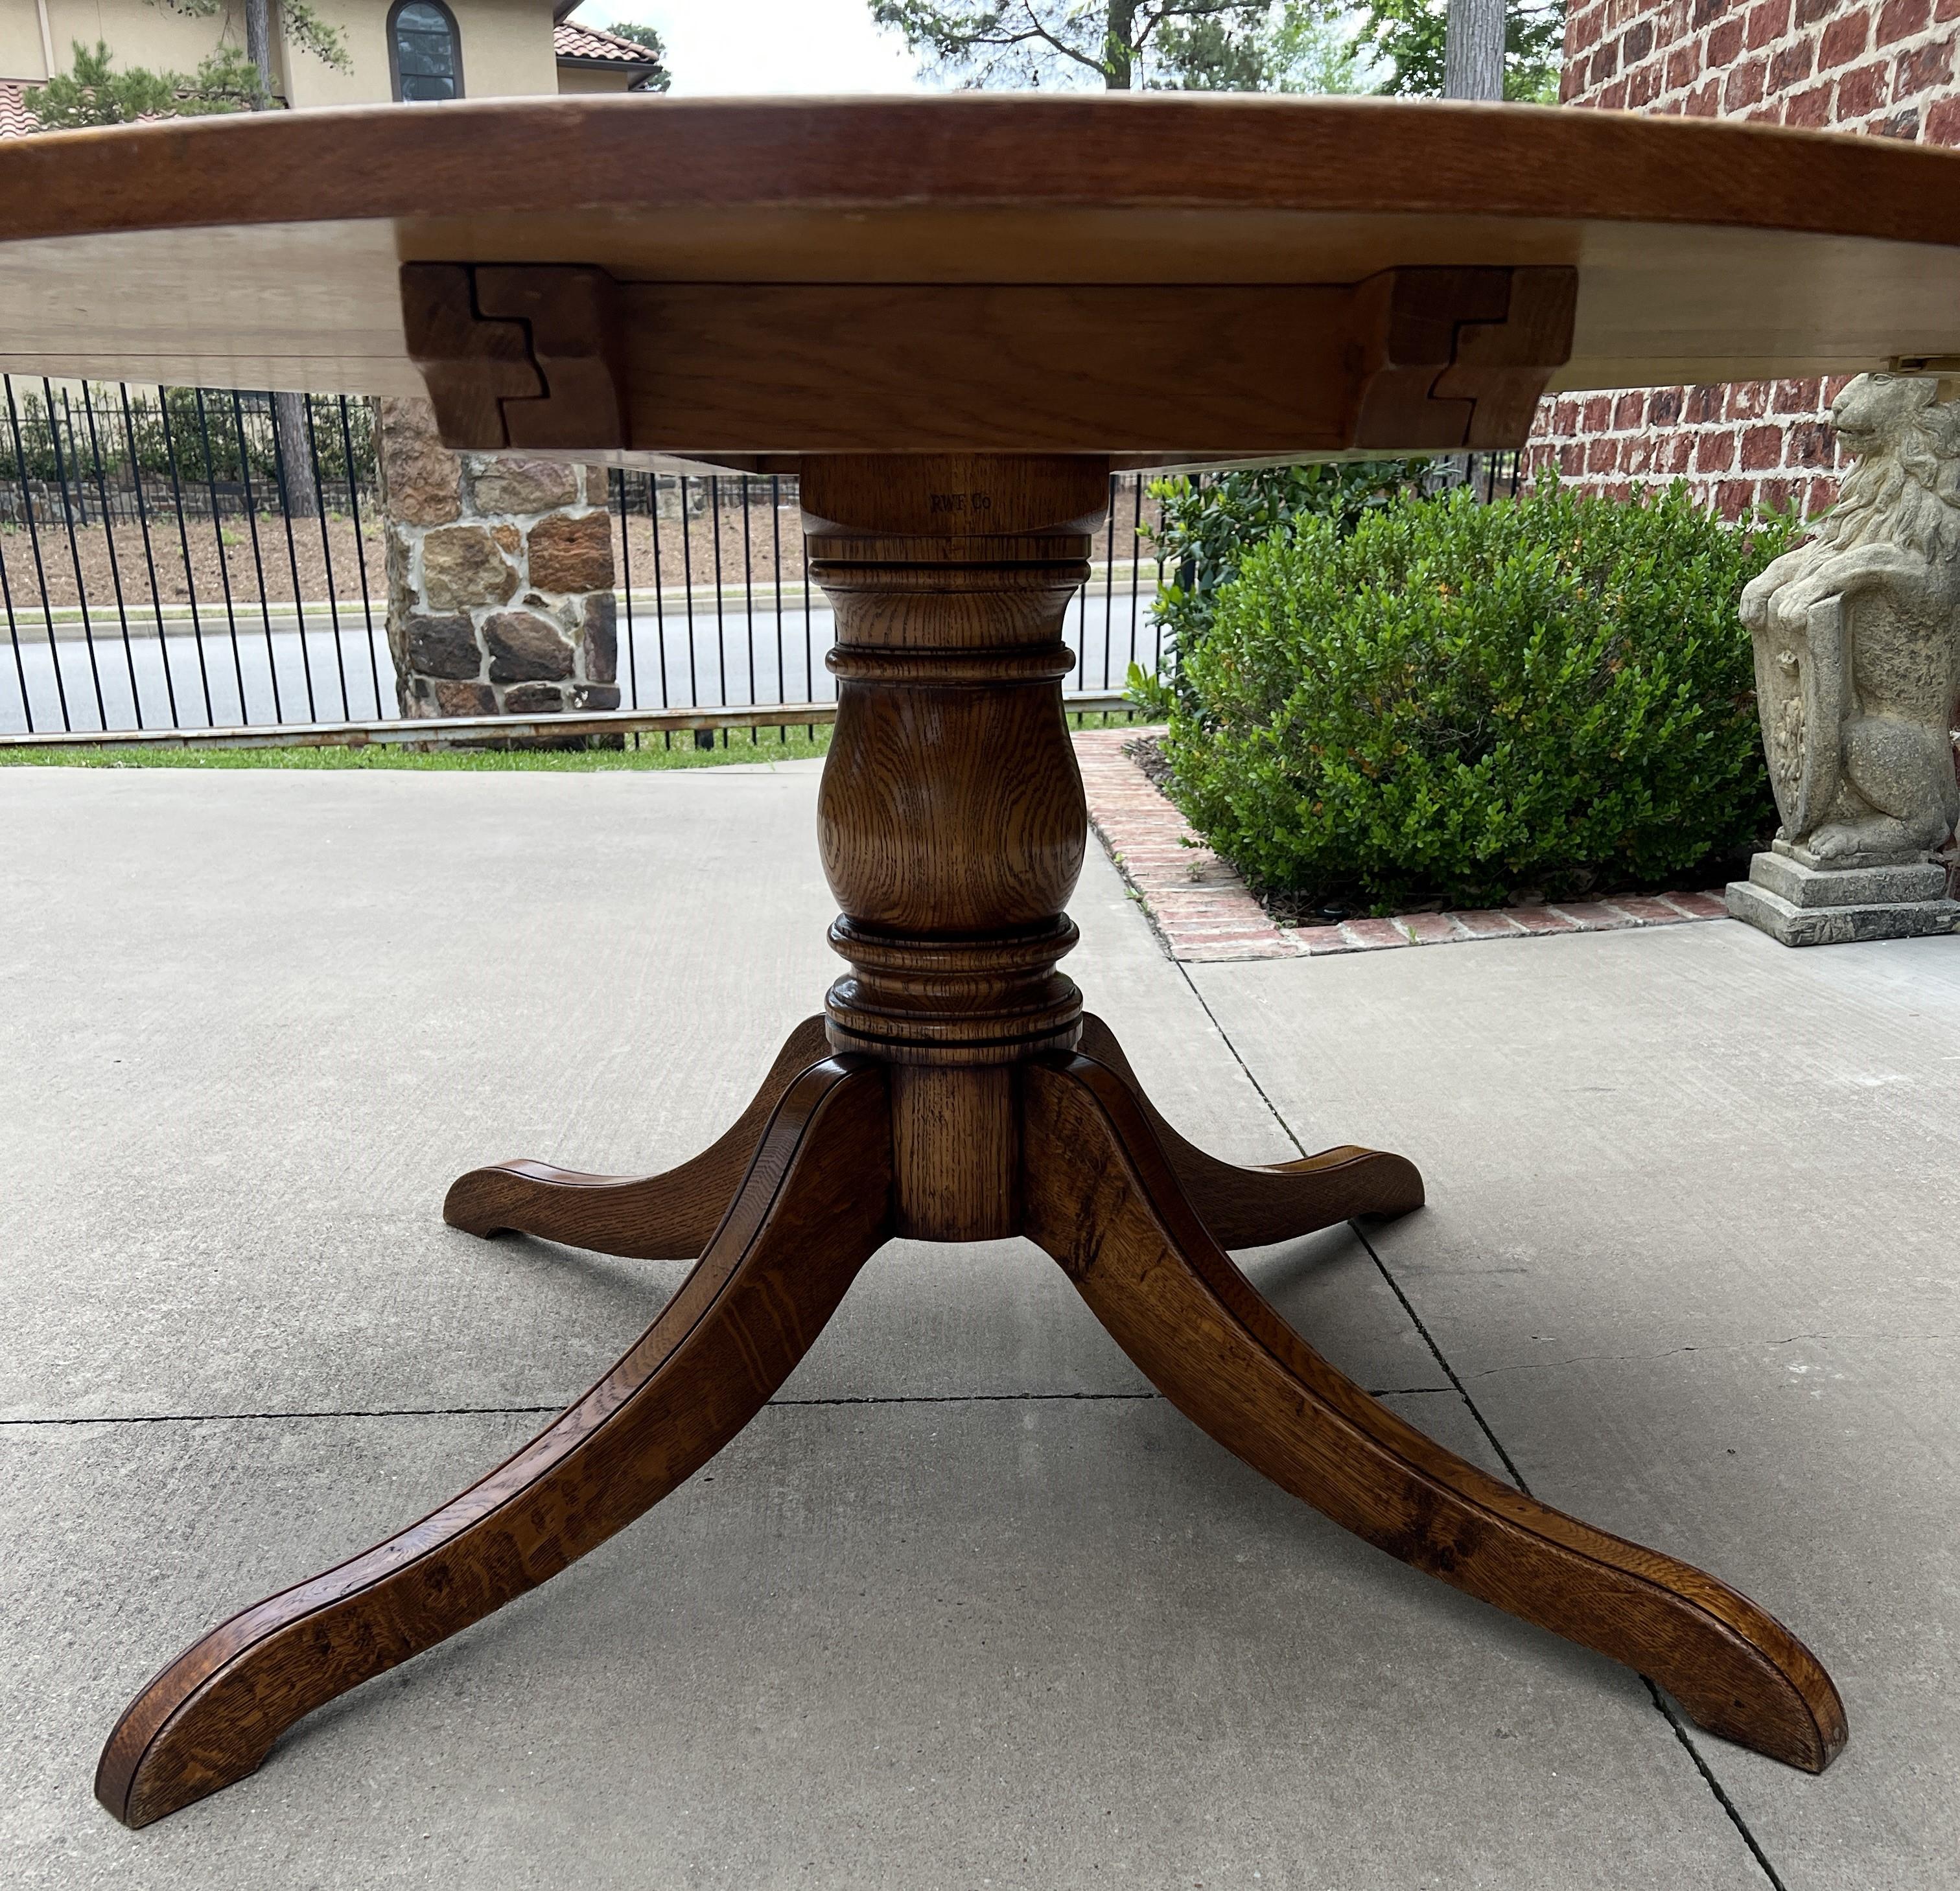 Carved Midcentury English Round/Oval Dining Table Pedestal Base with Leaf Oak, c. 1940s